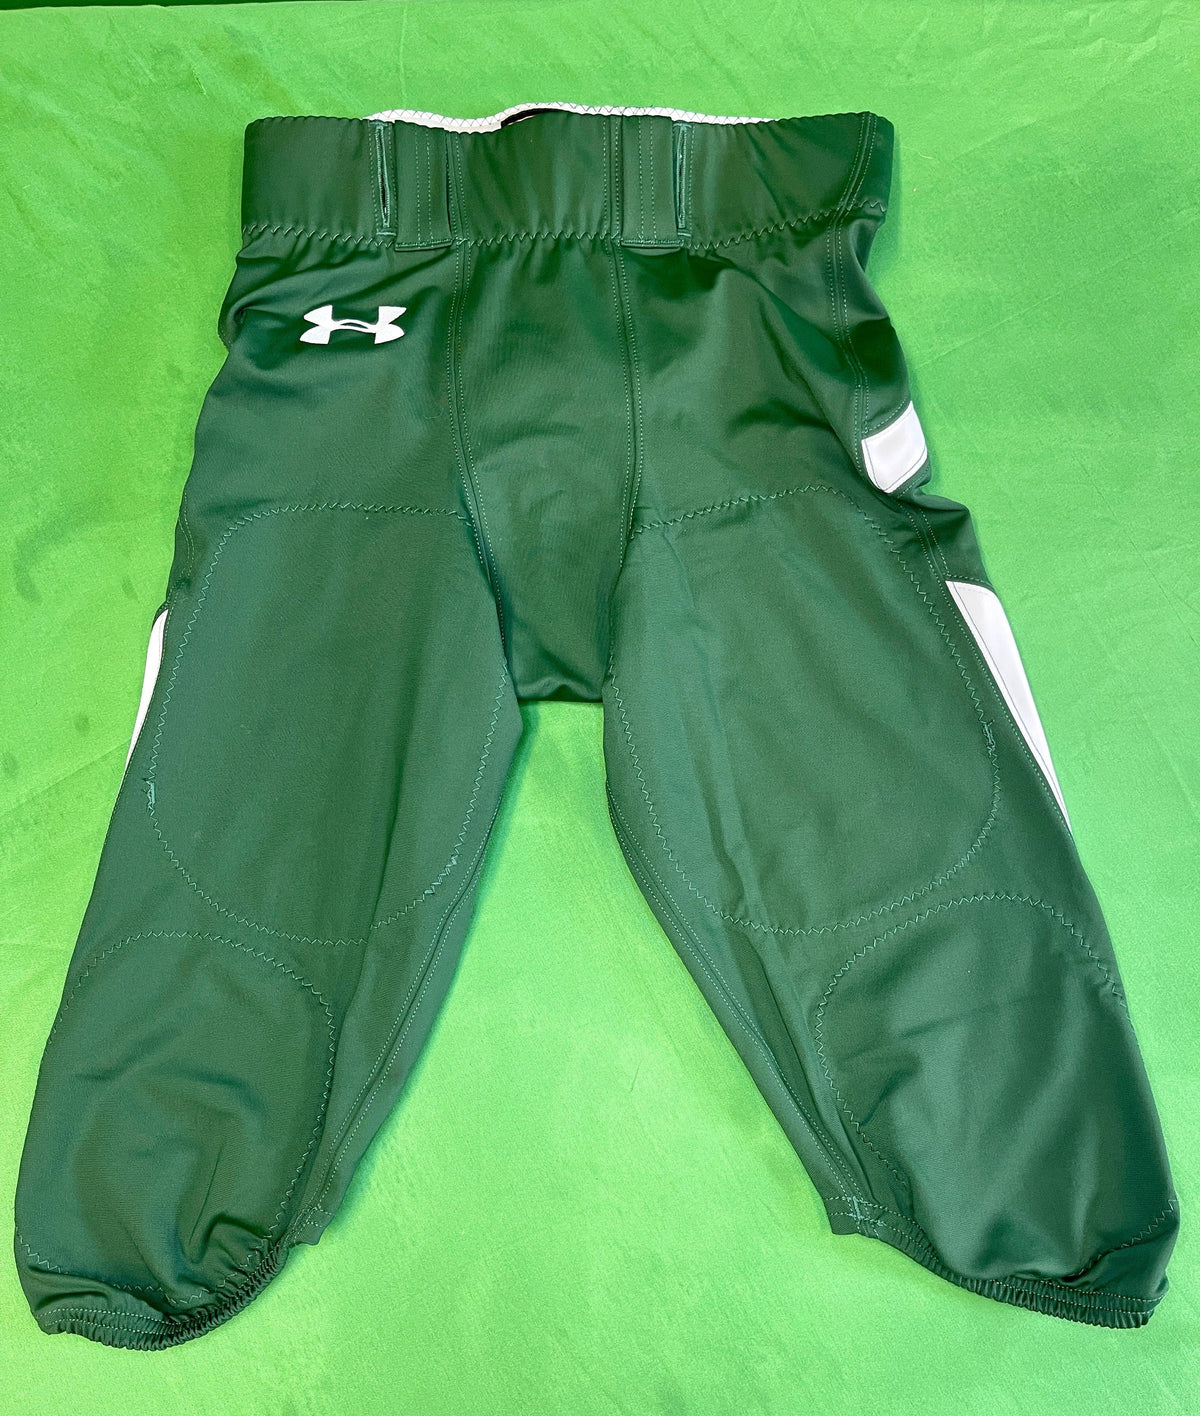 Under Armour American Football Pants Trousers Women's Small